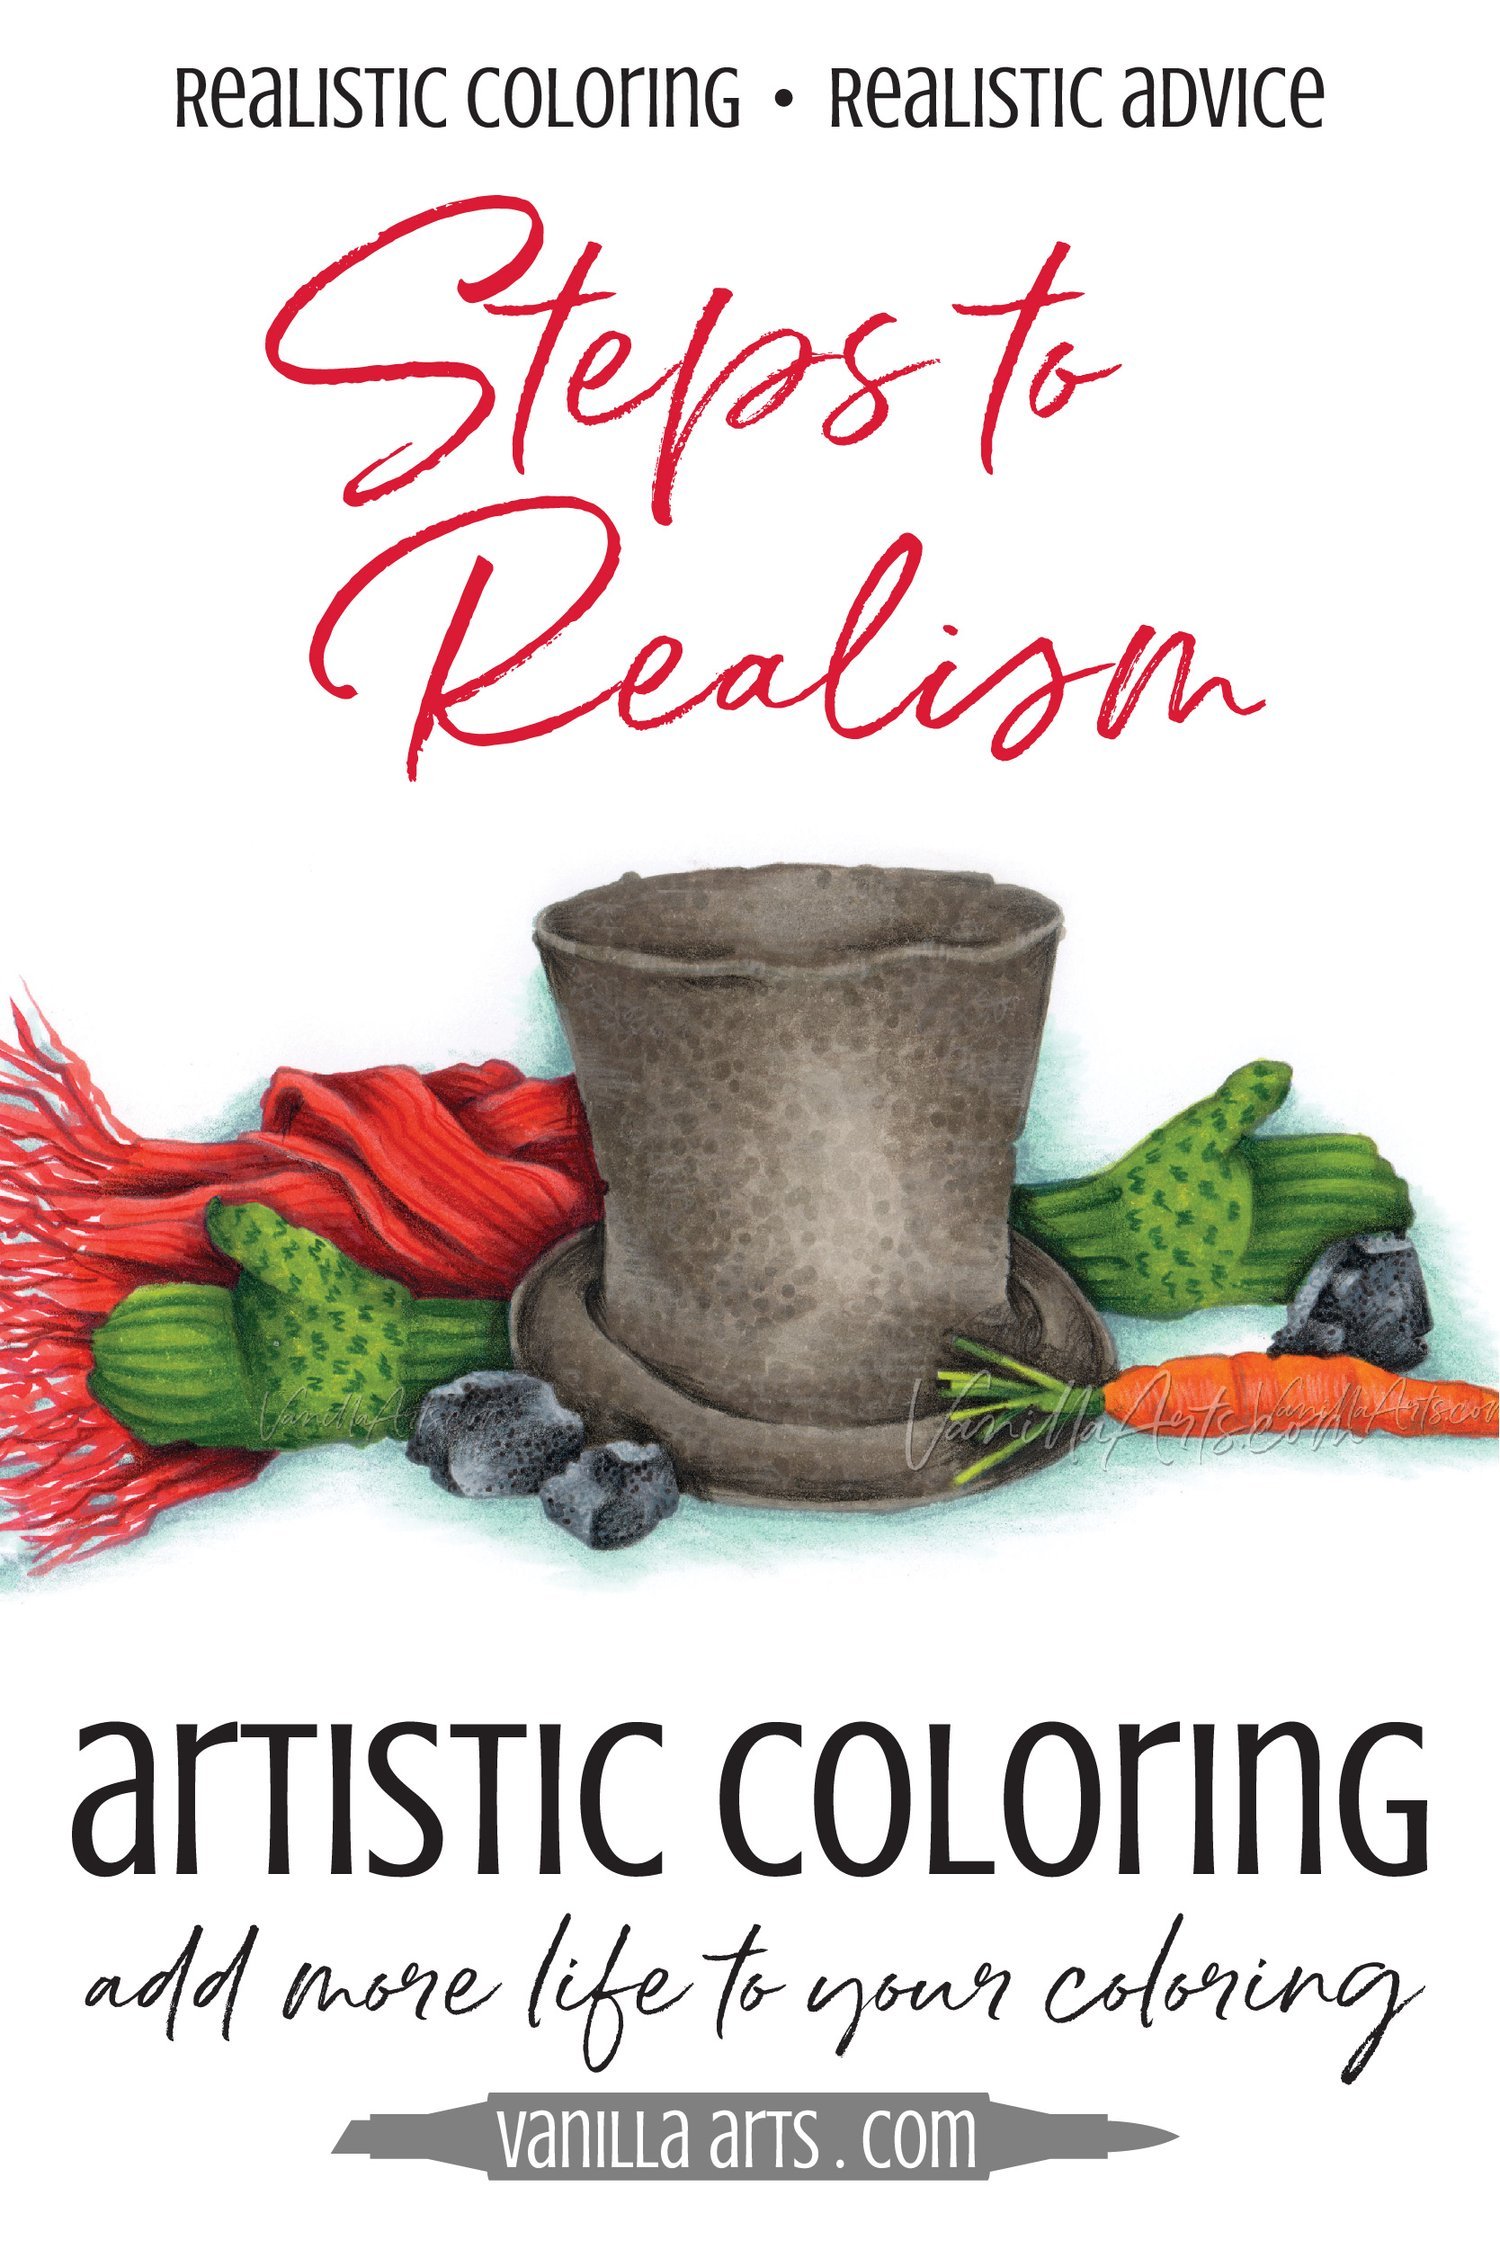 Steps to Realism: Coloring beyond Smooth Blending Combinations (Copic Marker, Colored Pencil)